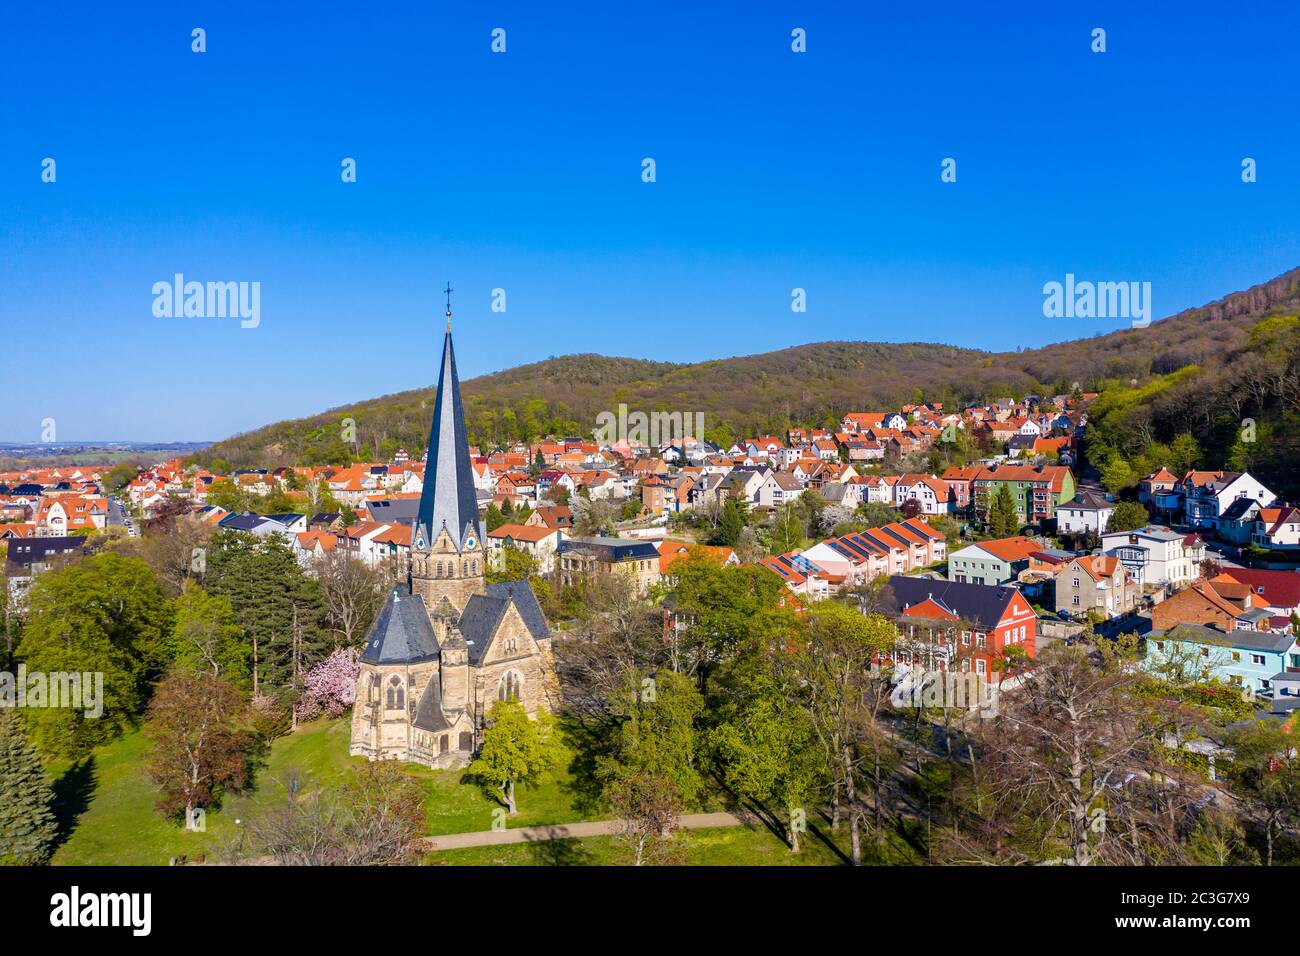 Thale in the Harz Mountains Aerial photographs Stock Photo